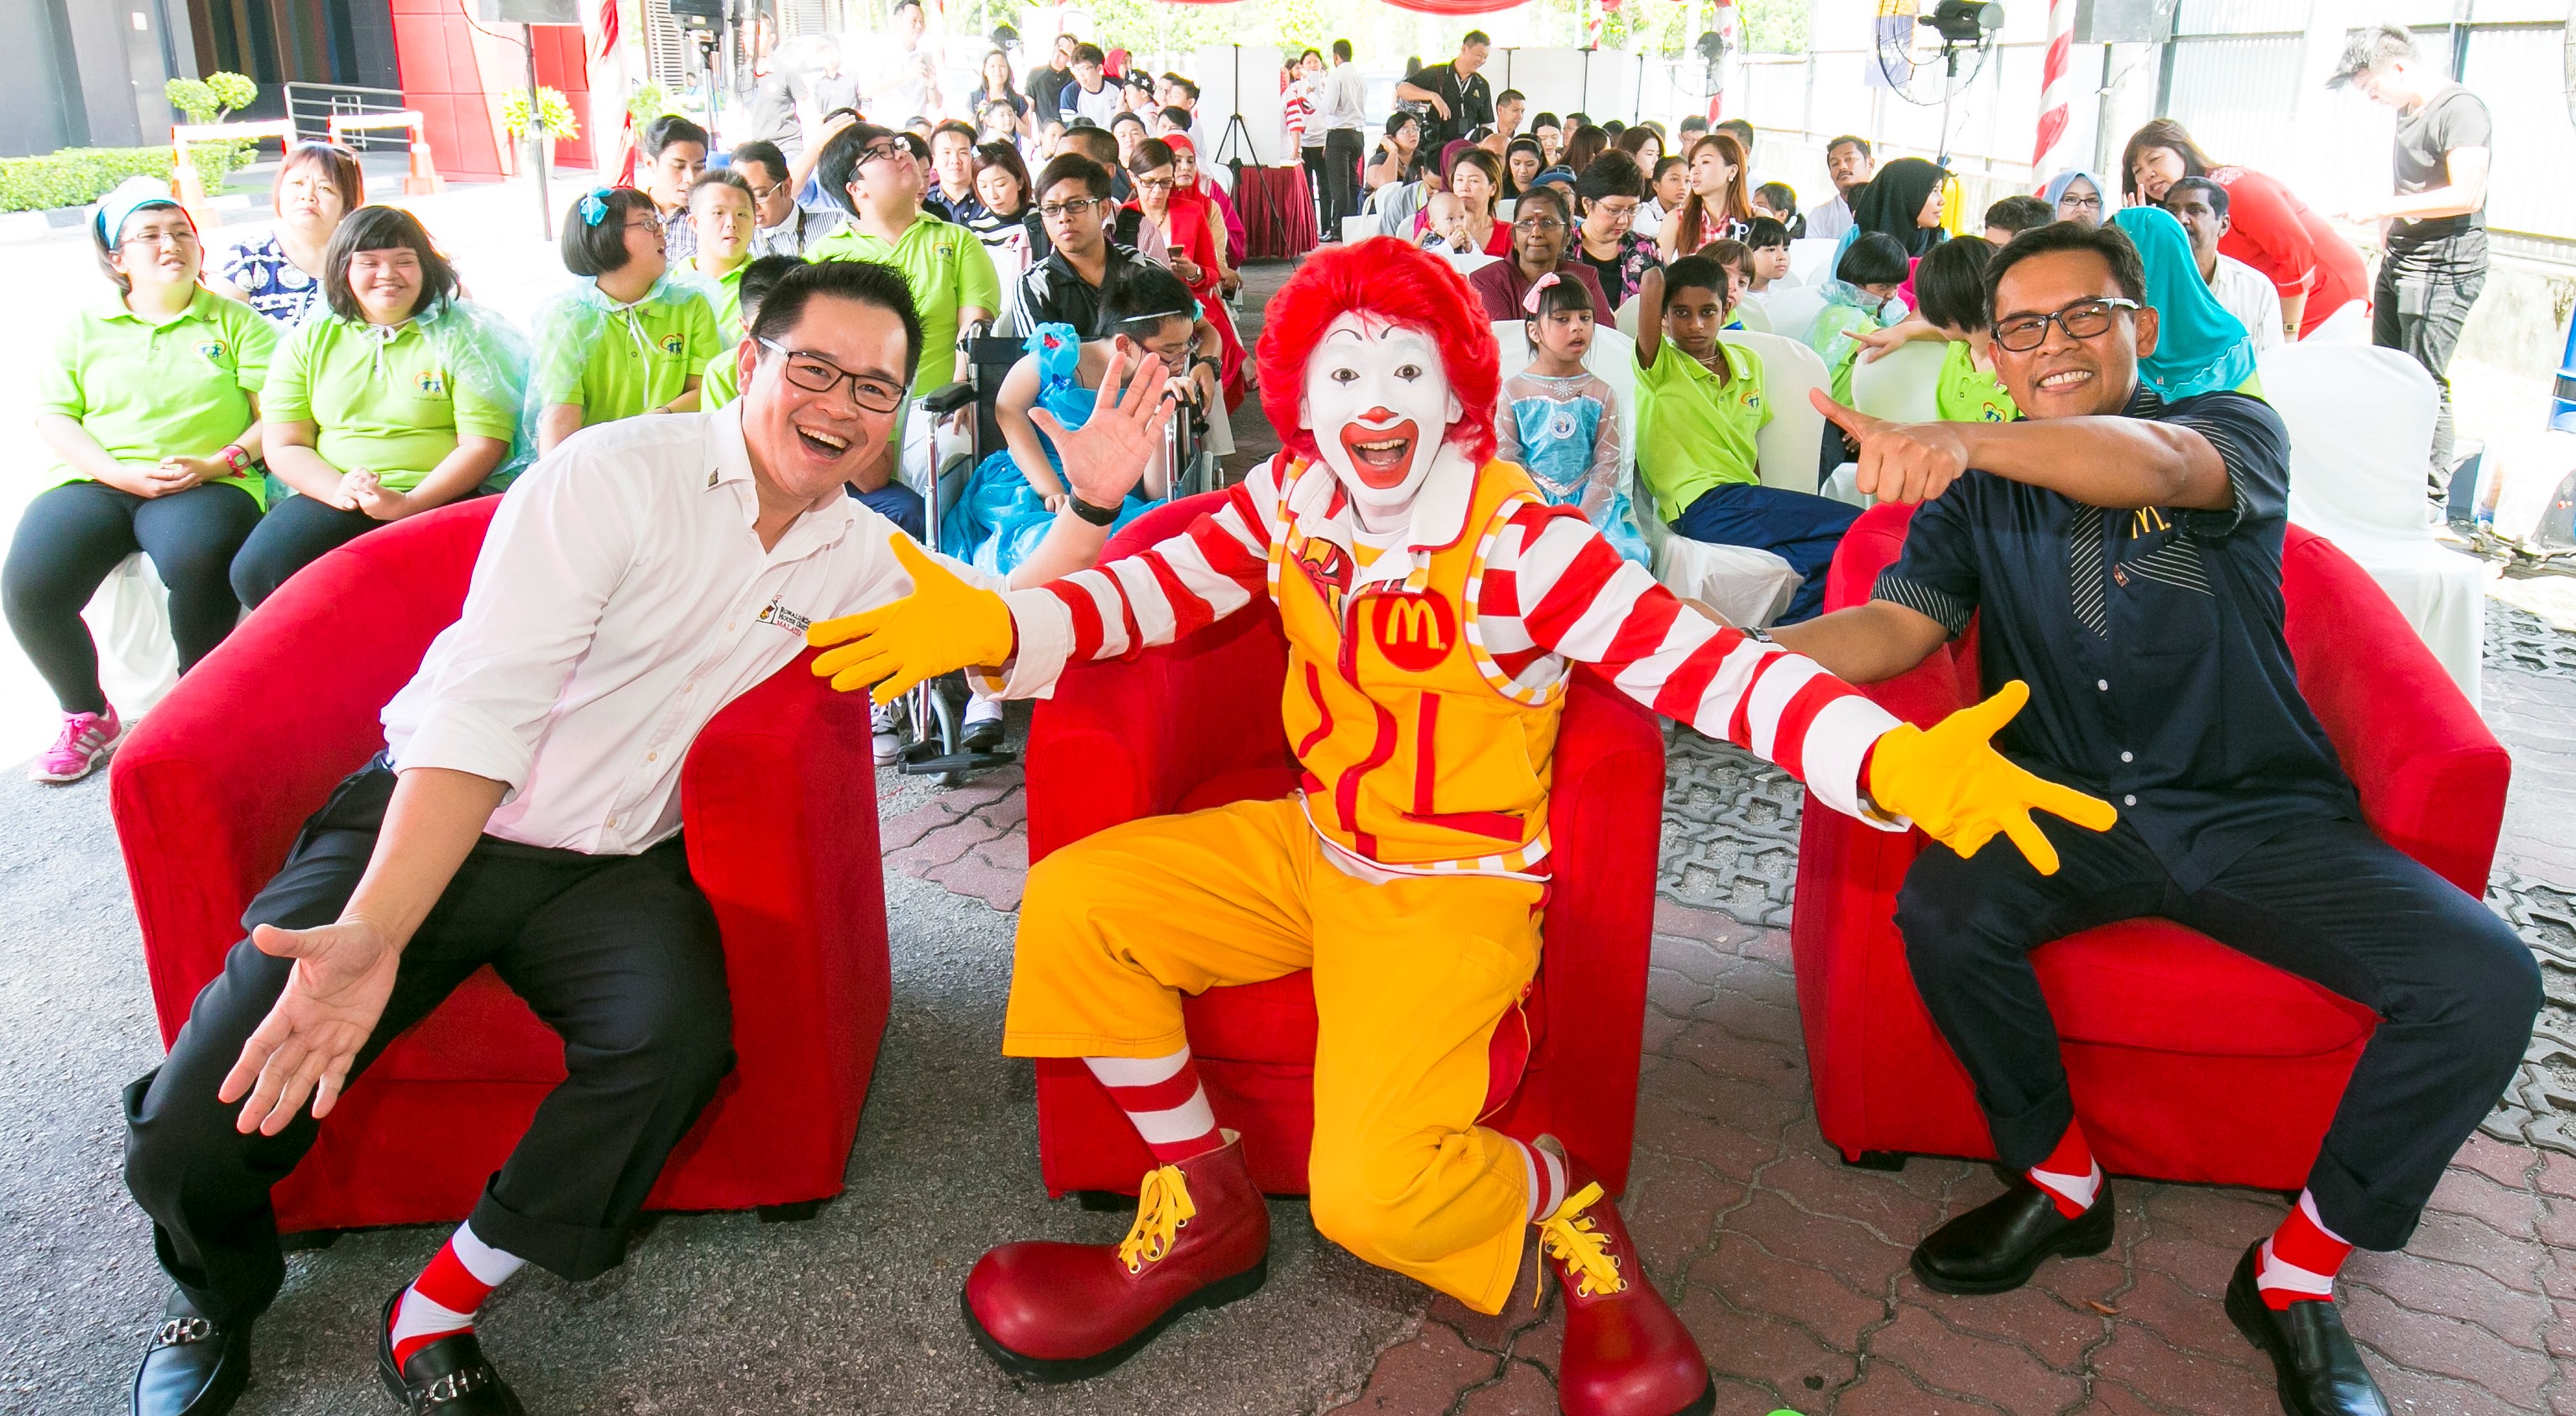 About RMHC | Ronald McDonald House Charities